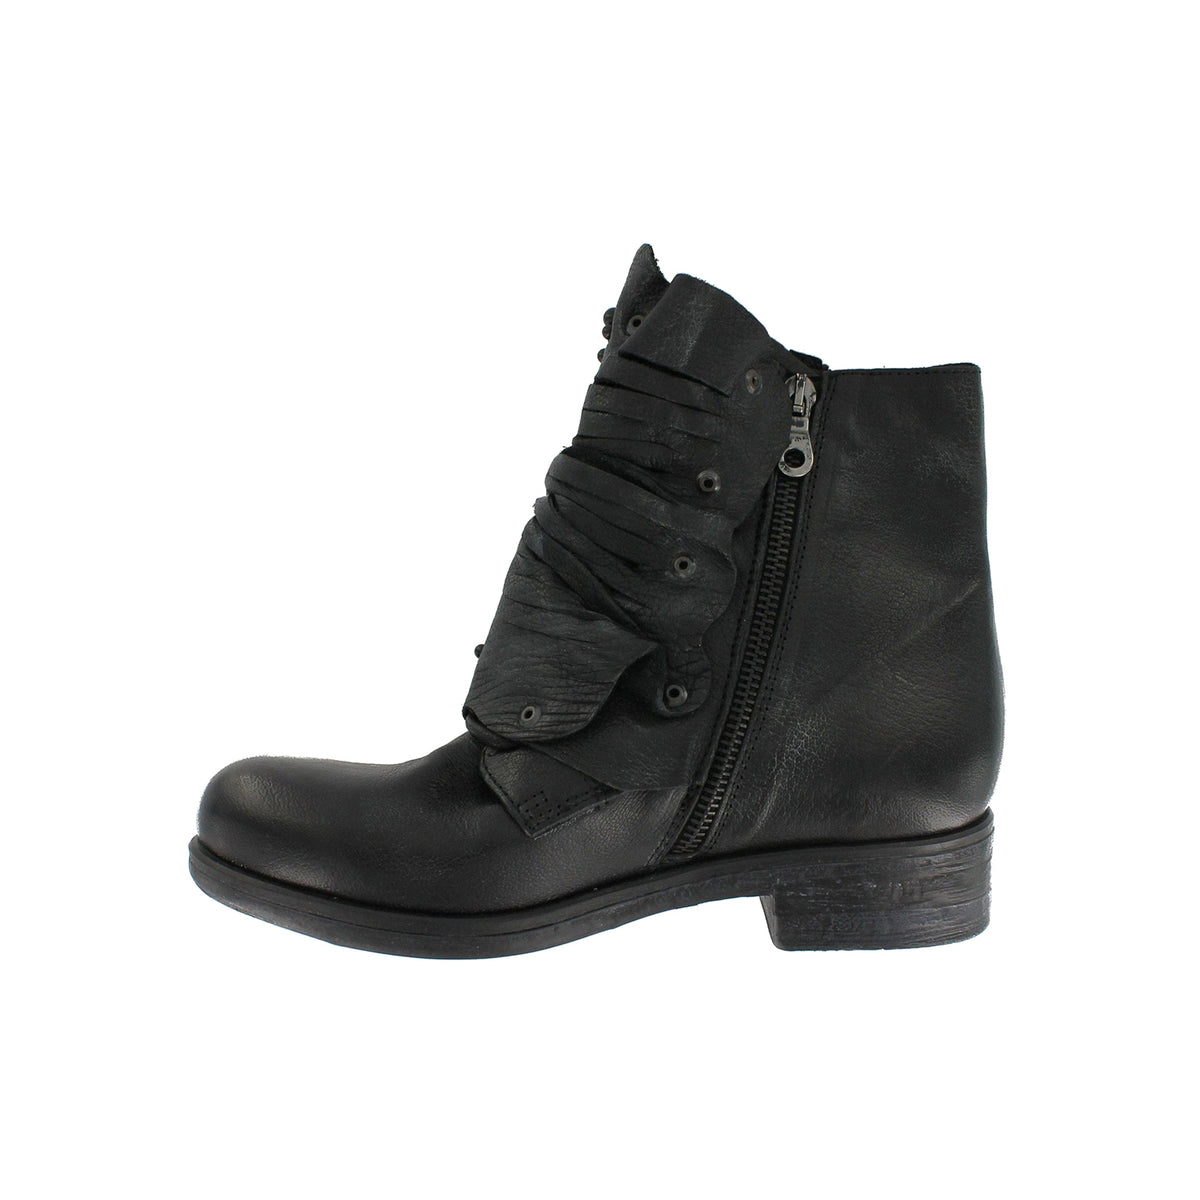 3577X53 - Black Ankle Boot